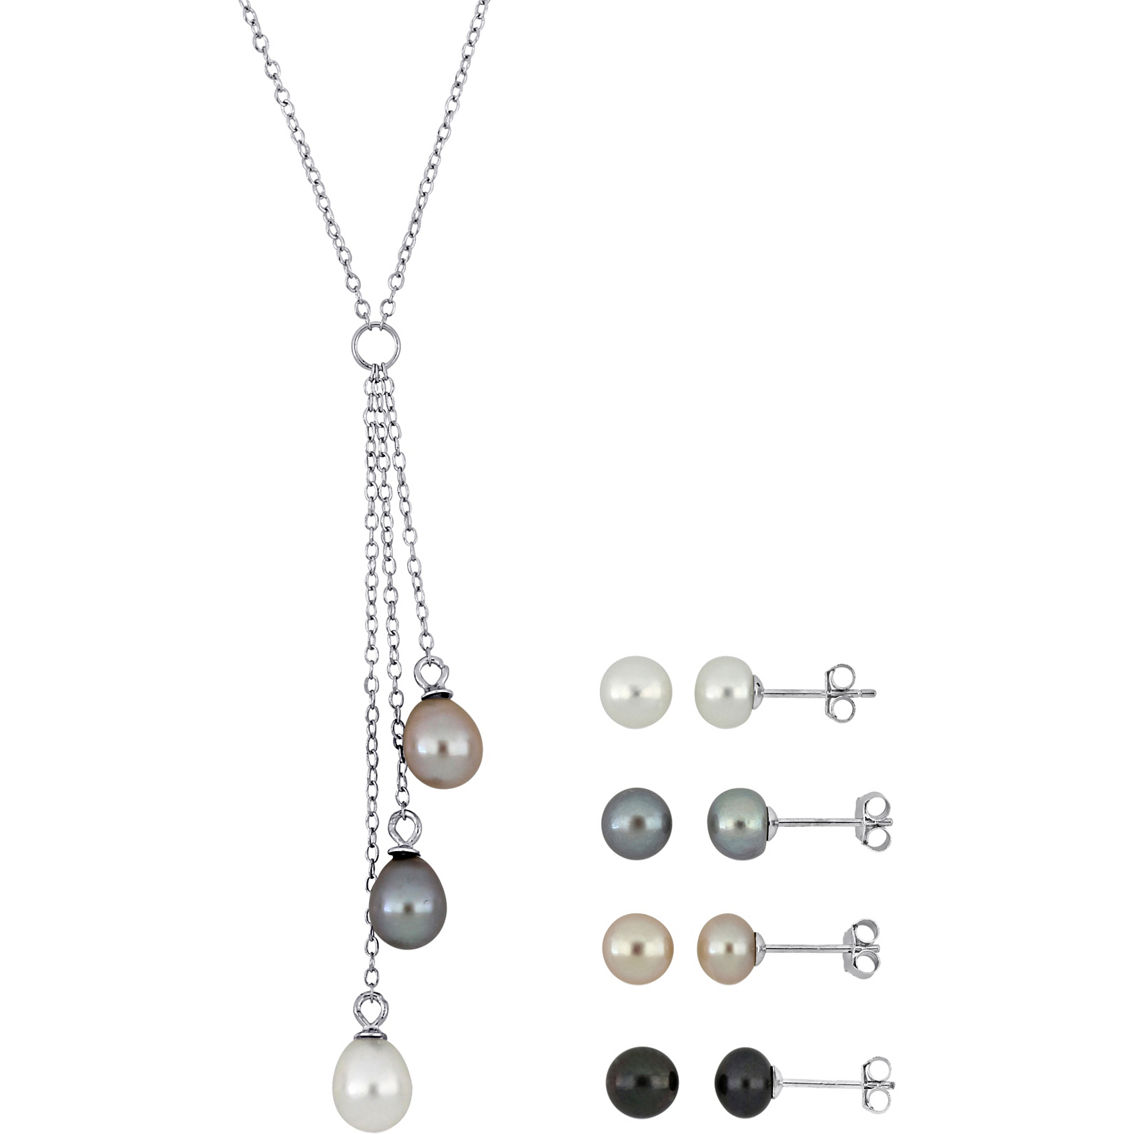 Sofia B. Sterling Silver Multicolor Cultured Freshwater Pearl 5 pc. Jewelry Set - Image 4 of 4